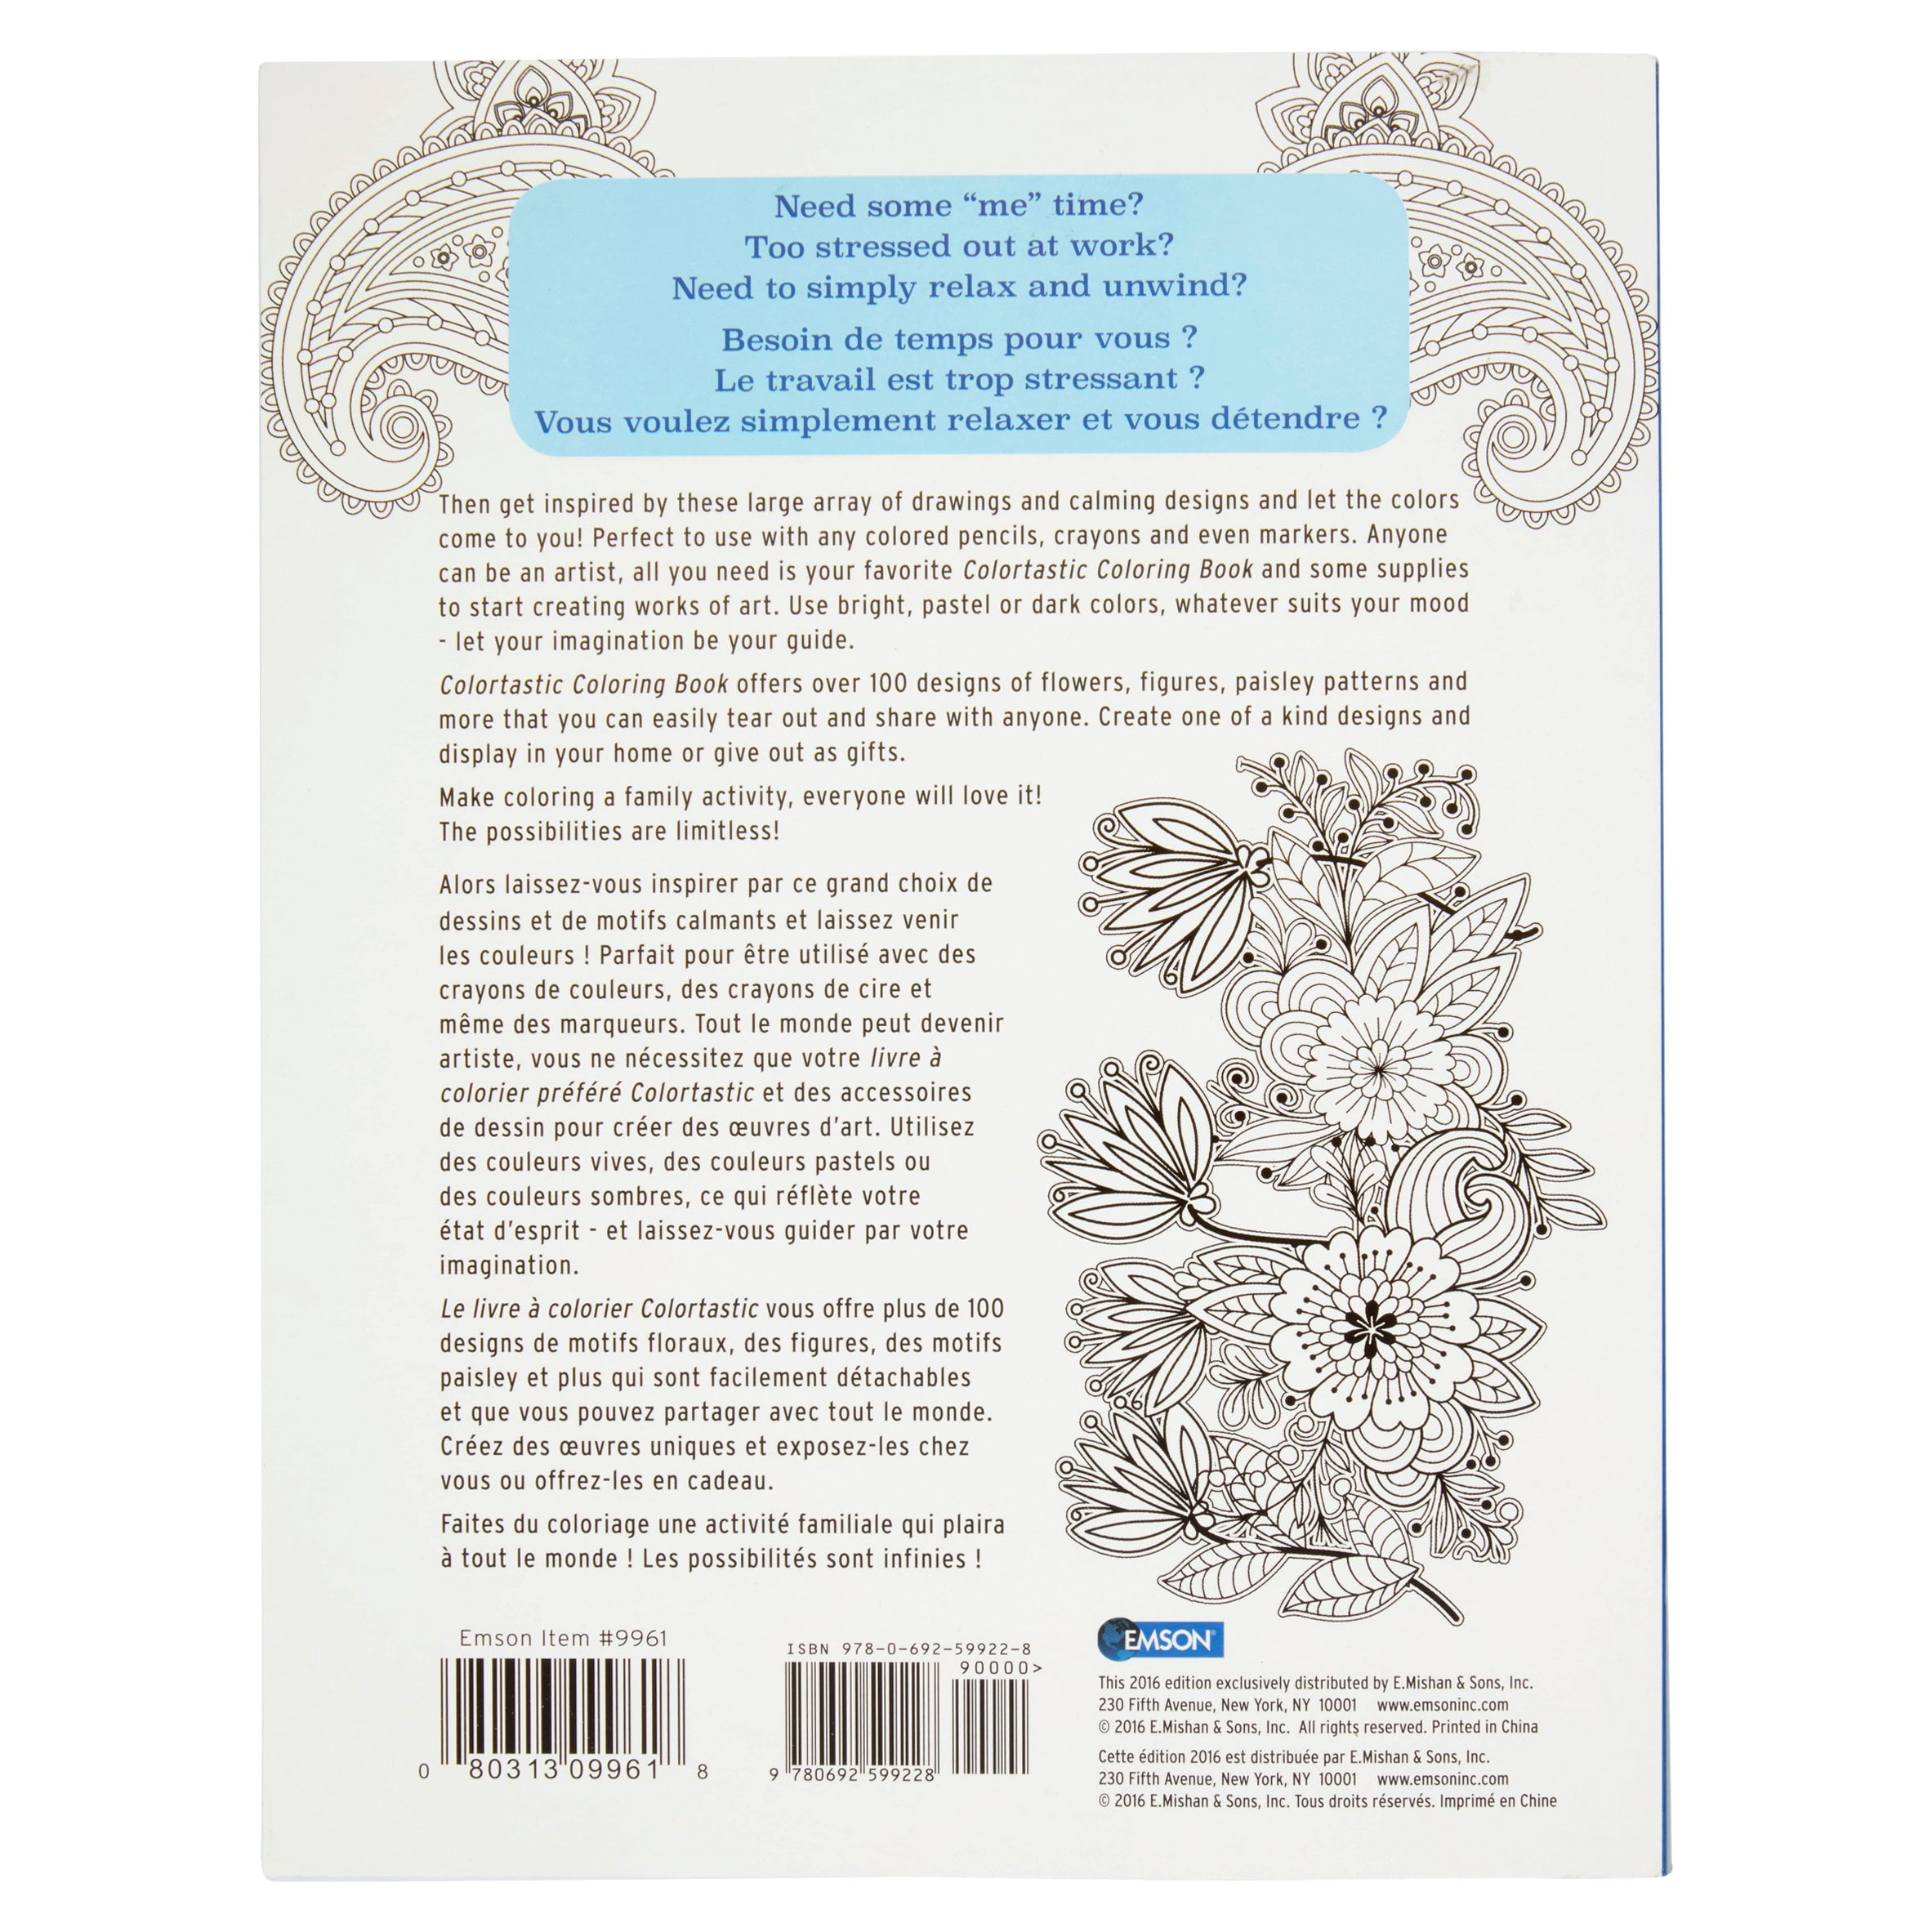 Colortastic Relaxation Coloring Book for Grown Ups and Adults by